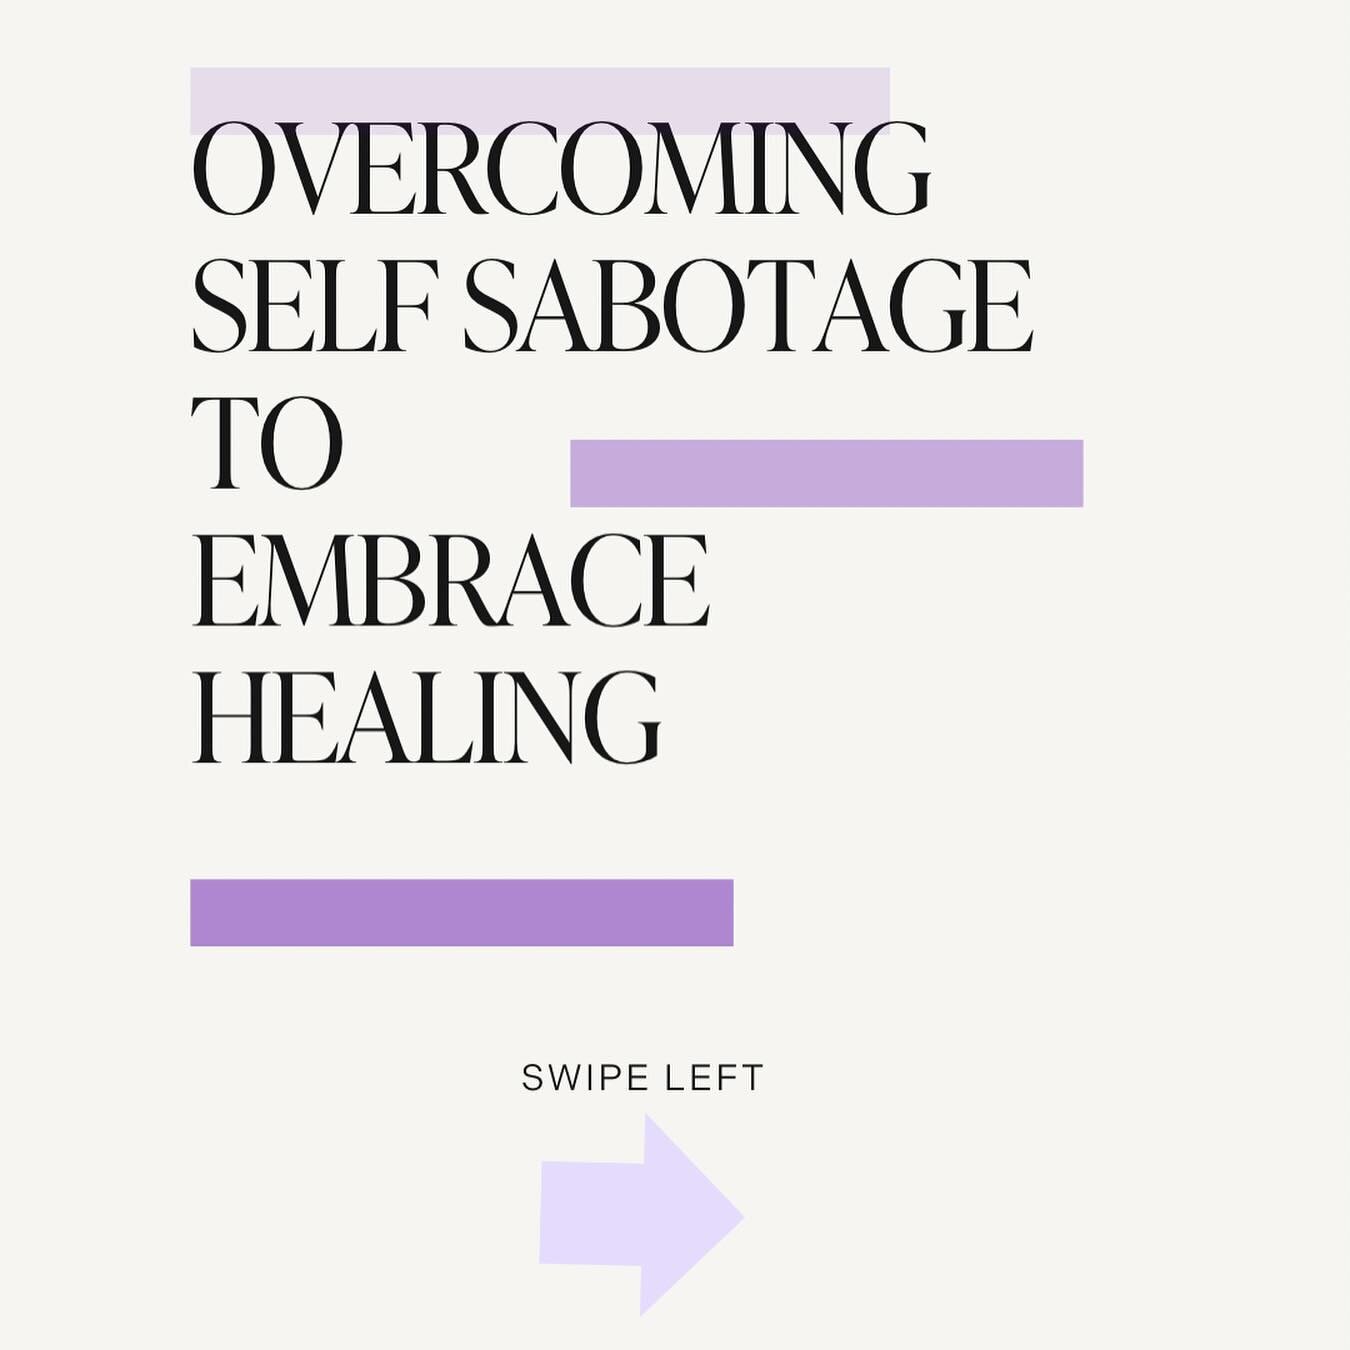 If you&rsquo;re tired of feeling stuck and ready to step into a life of empowerment and growth, I invite you to join my upcoming masterclass: &ldquo;Break Free from Self-Sabotage to Embrace Healing.&rdquo;

In this transformative session happening on